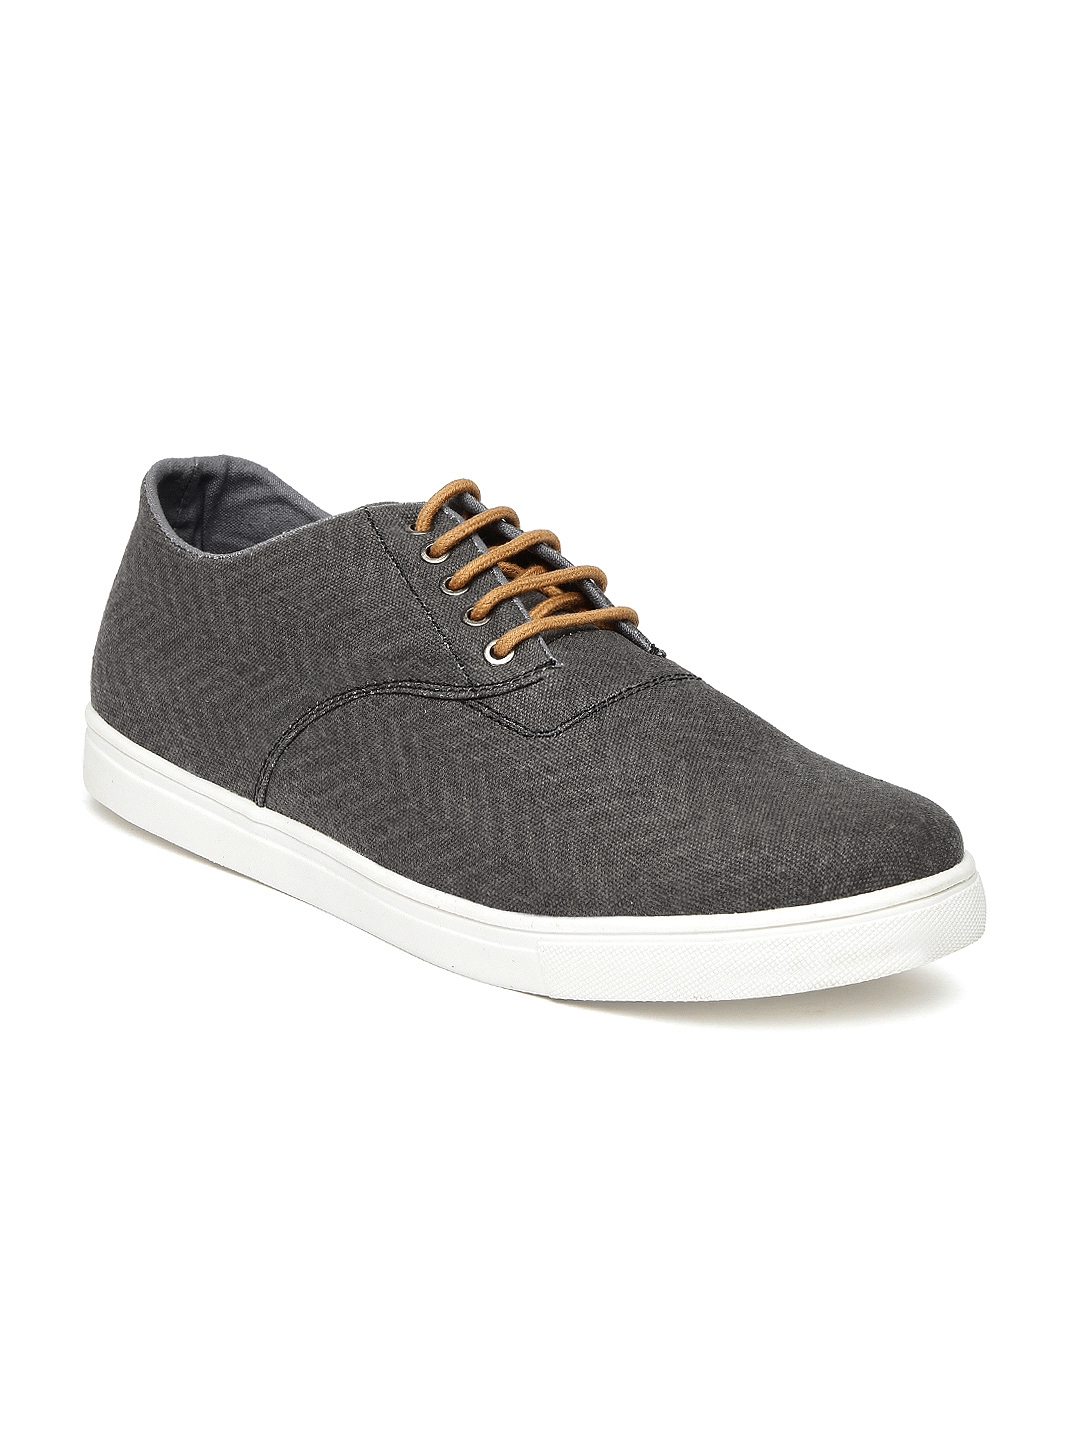 Buy Roadster Men Grey Casual Shoes - Casual Shoes for Men 1185145 | Myntra